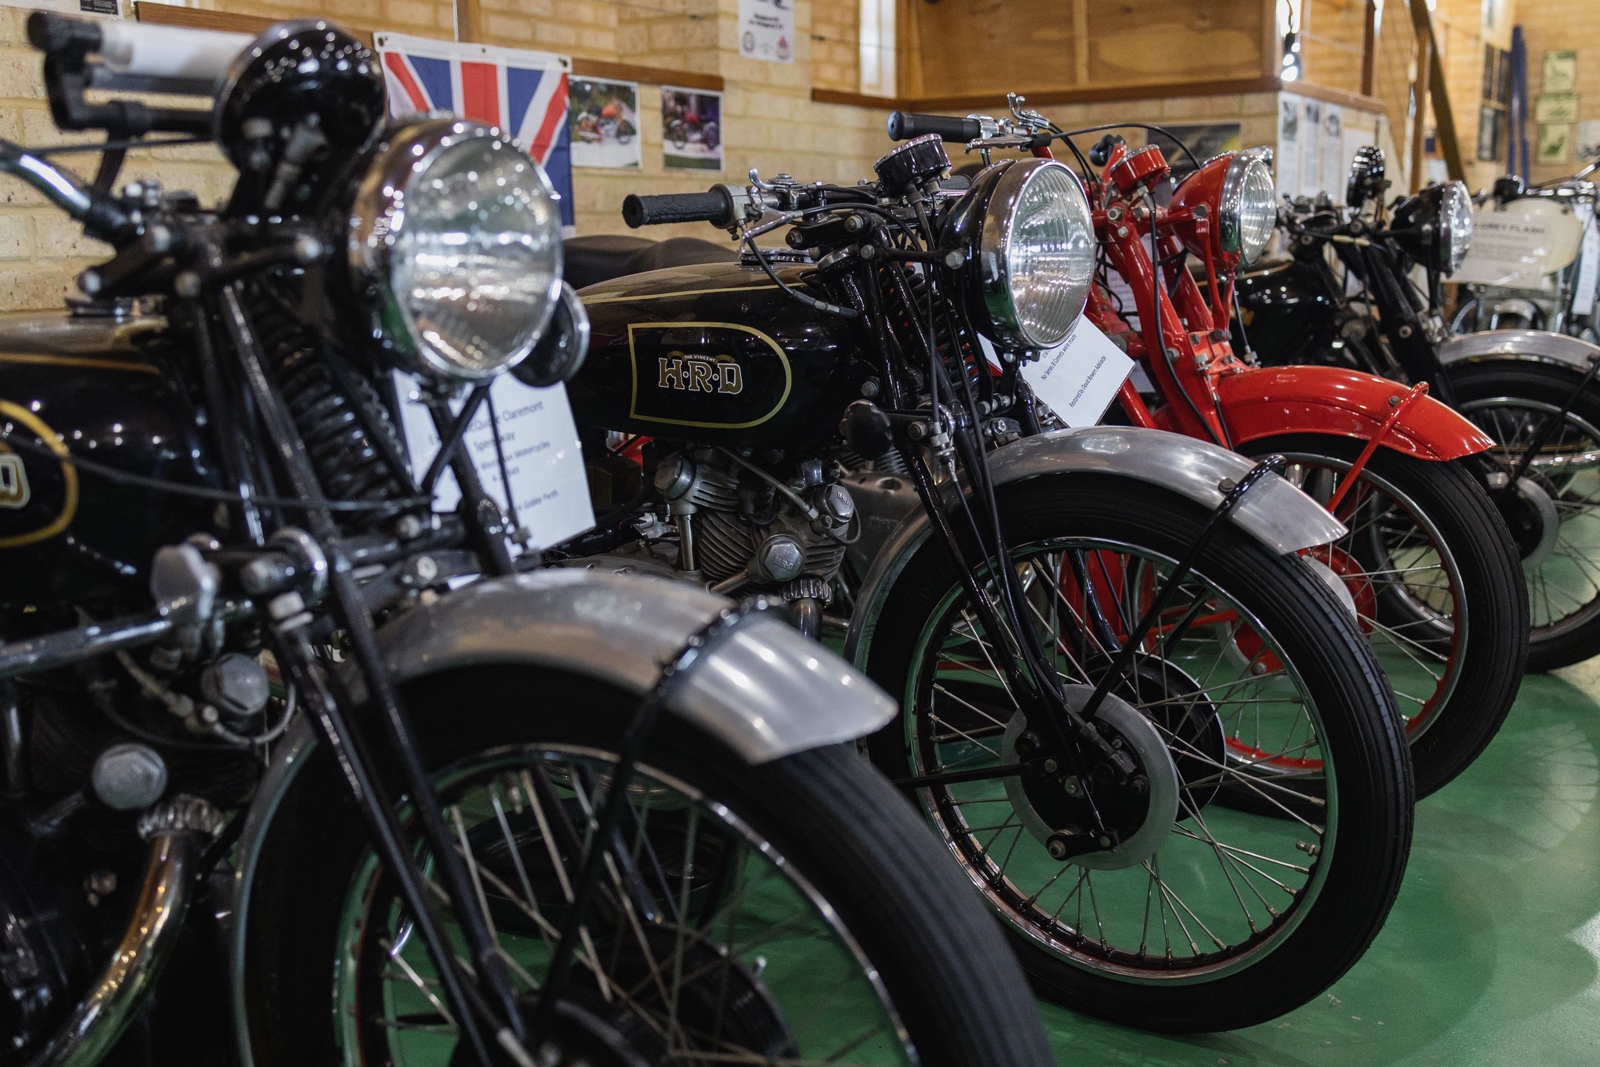 Collection of Vincent HRD motorcycles